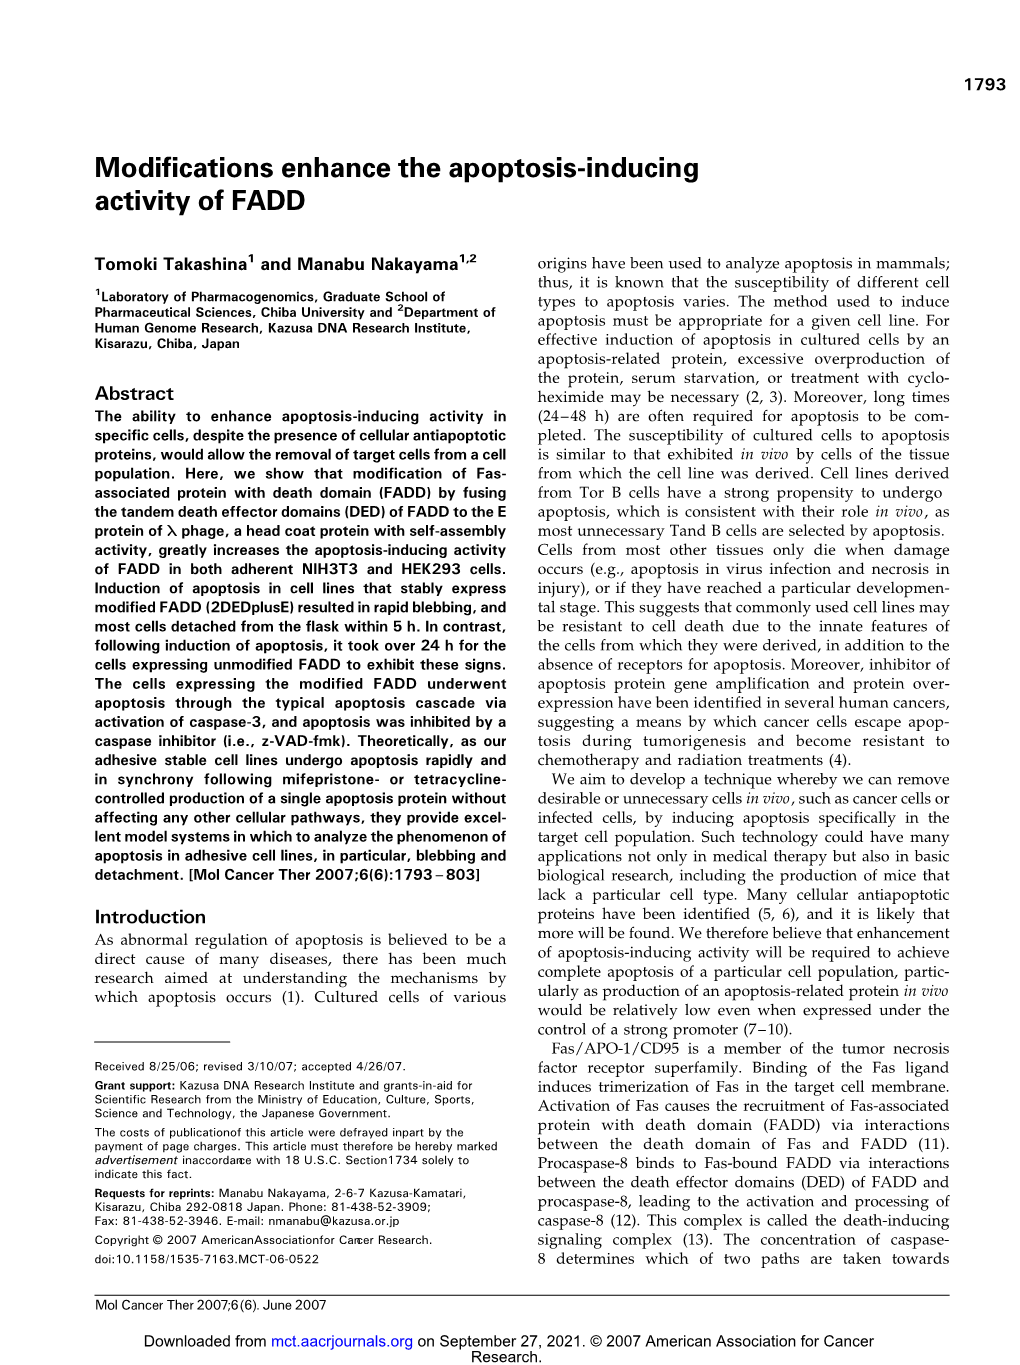 Modifications Enhance the Apoptosis-Inducing Activity of FADD